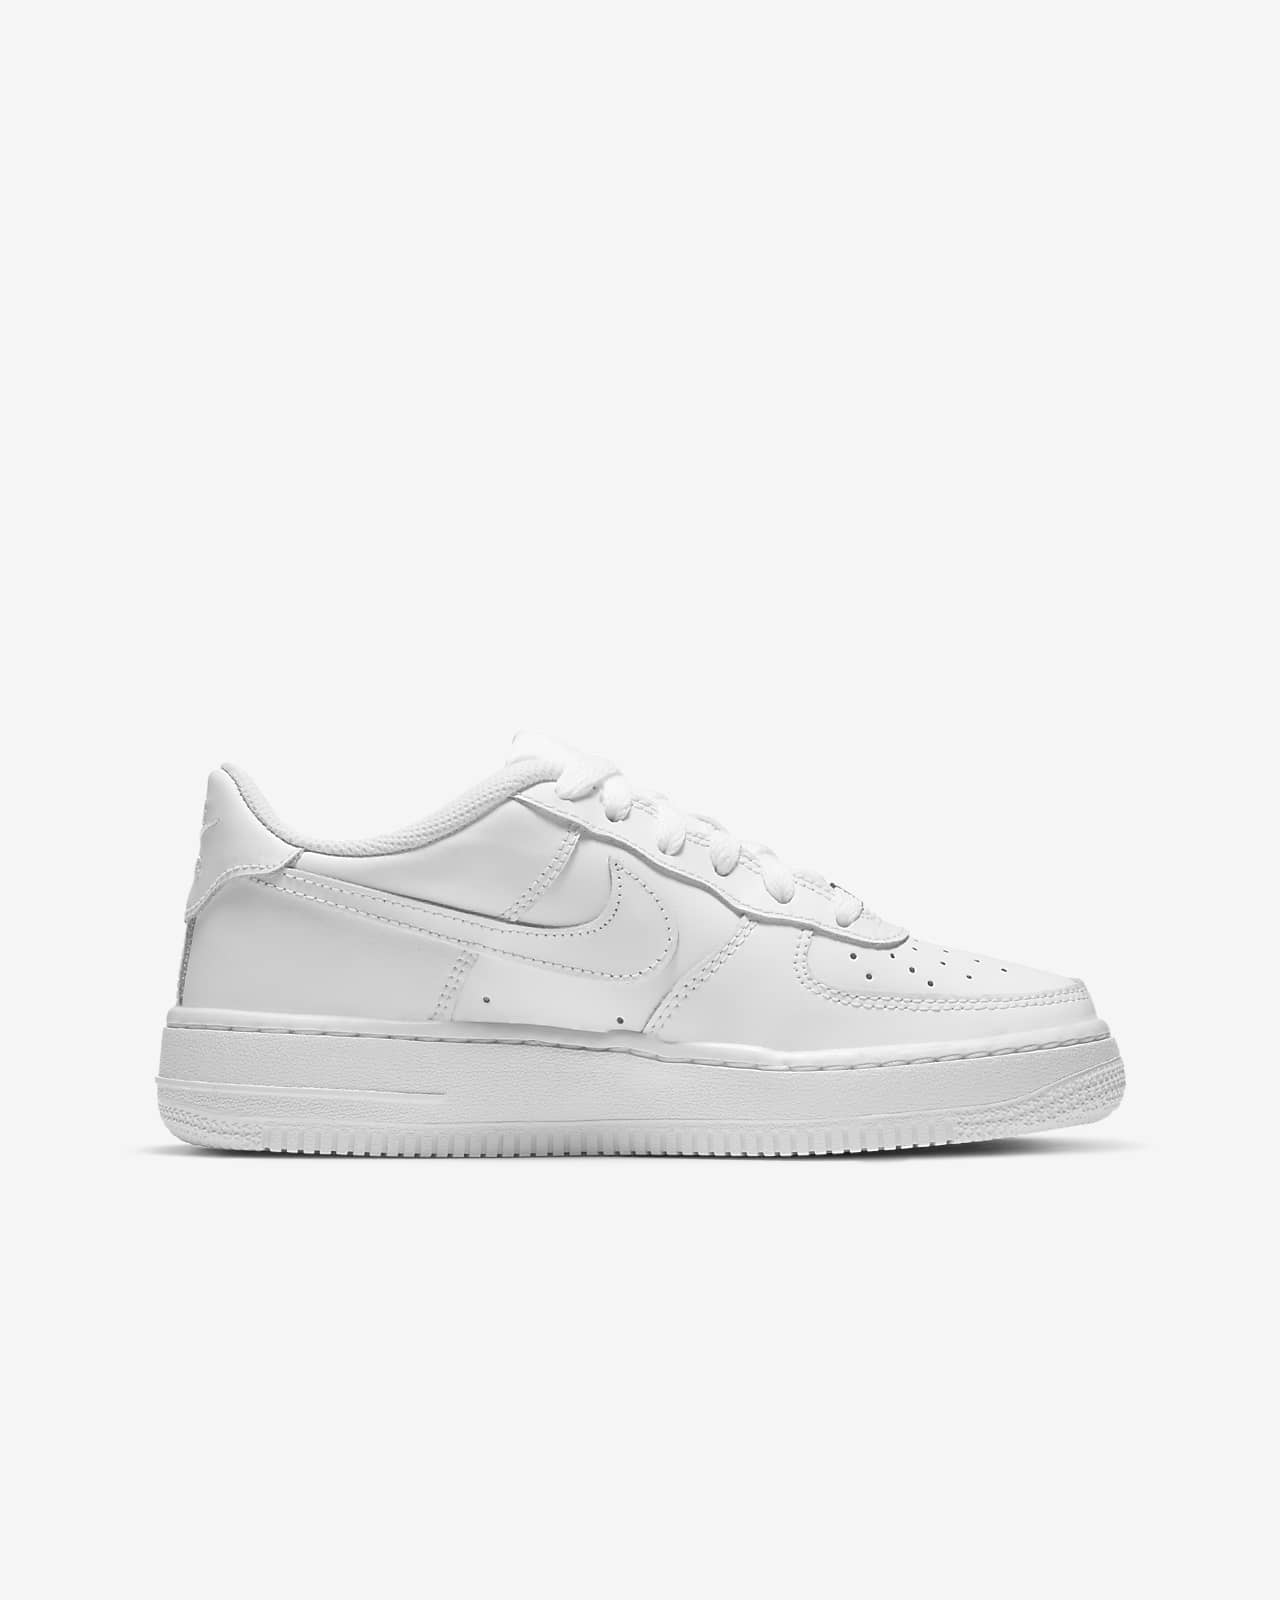 air force 1 junior size 4.5